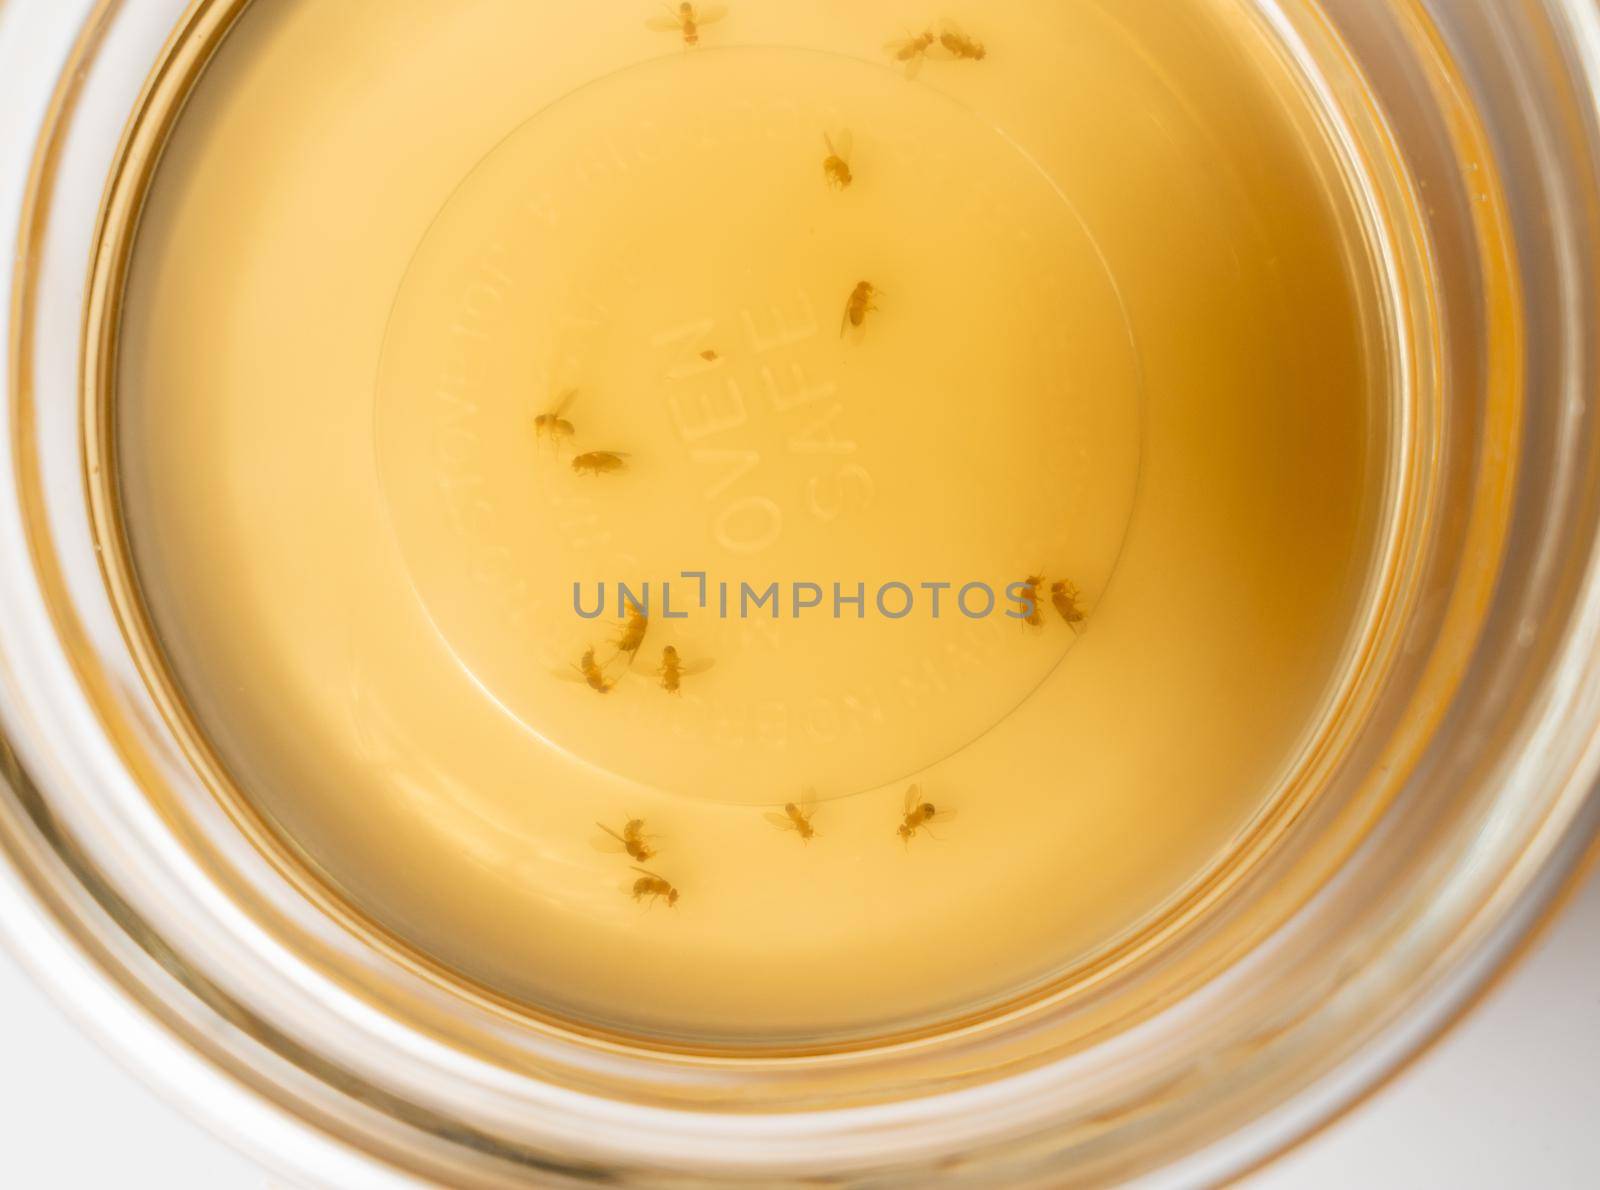 Fruit flies collected in a glass bowl with wine or cider vinegar and soap by steheap